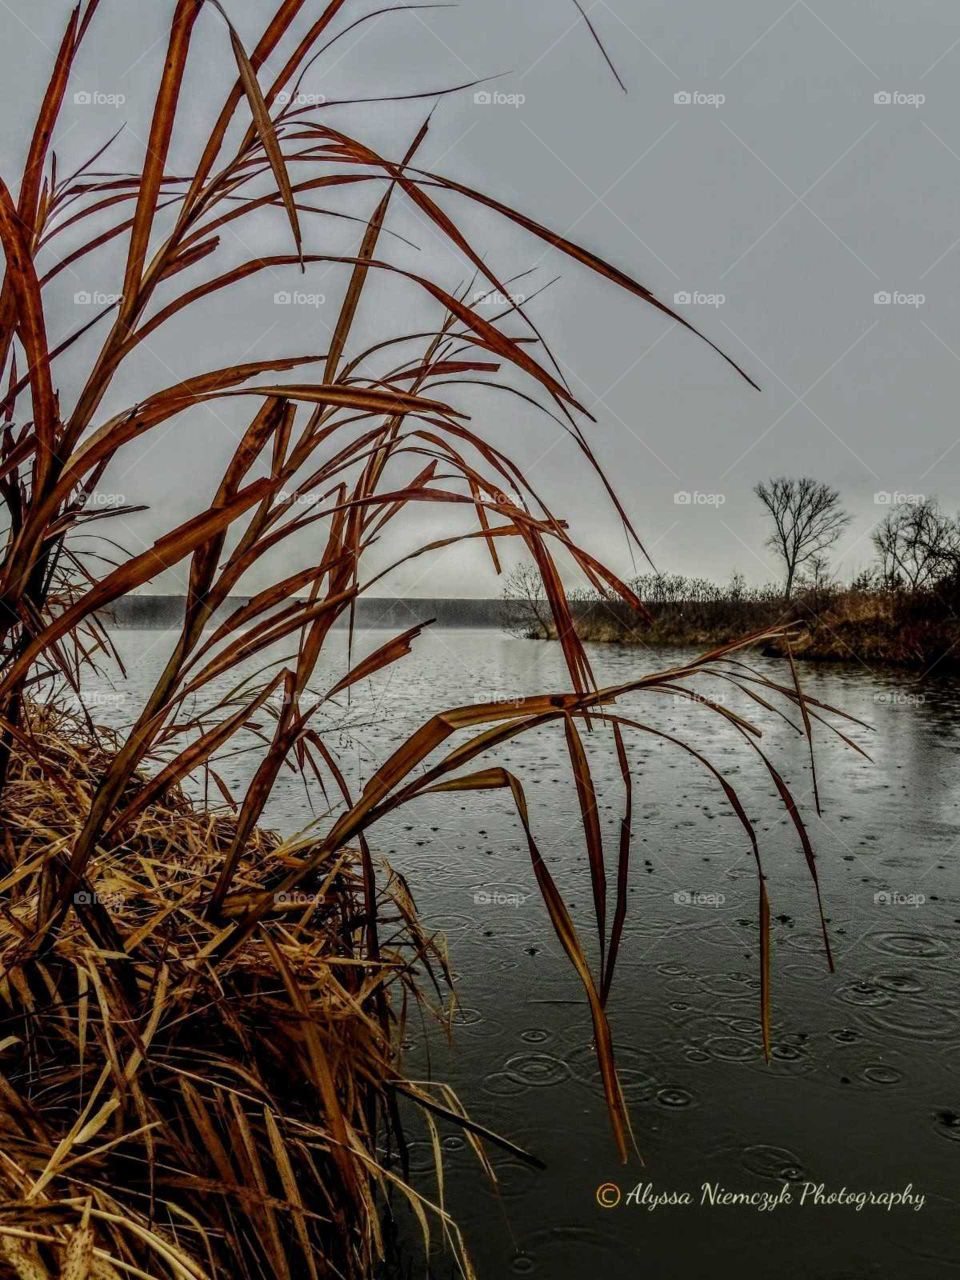 Reeds soaked with rain. Foggy day. "My Getaway".